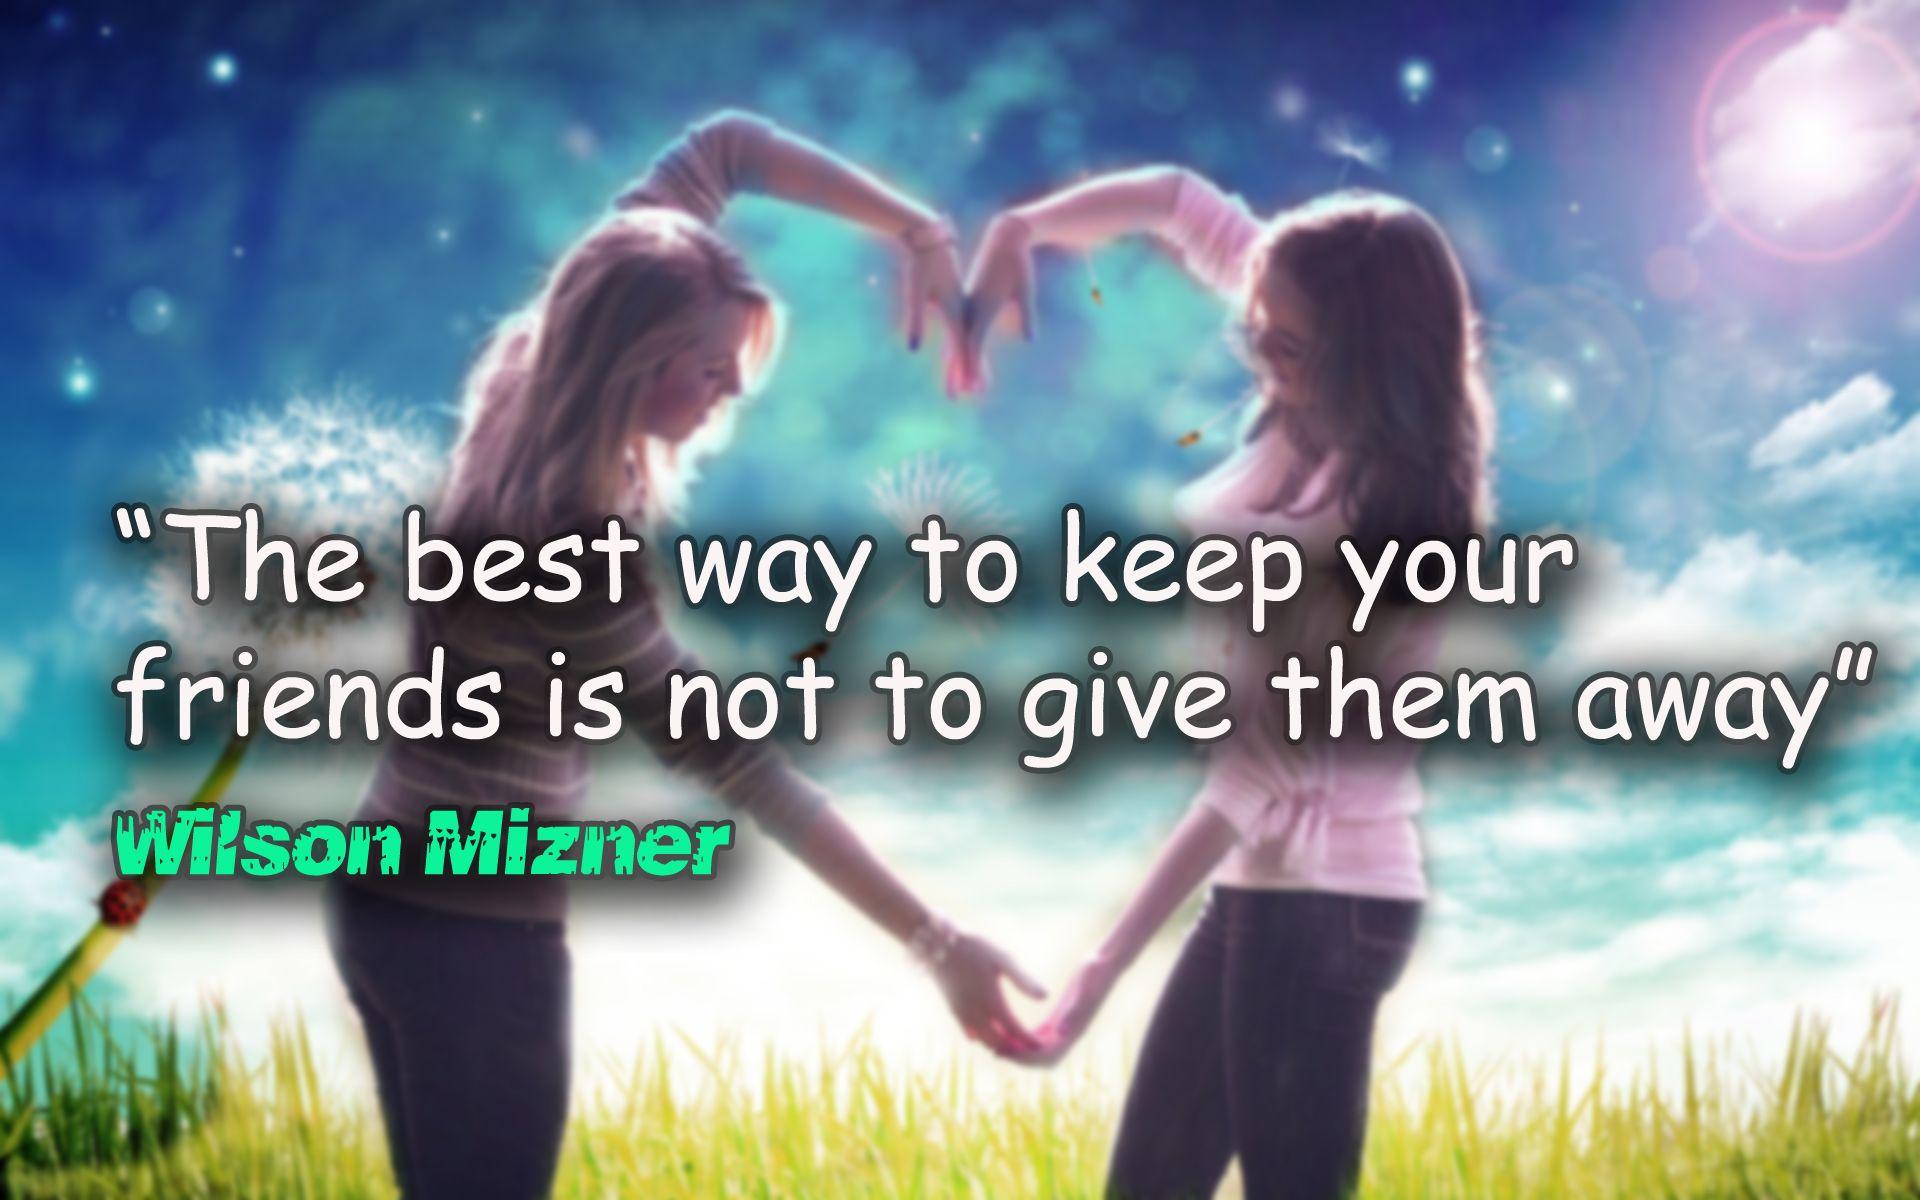 Friendship Wallpapers For Mobile With Quotes - Wallpaper Cave